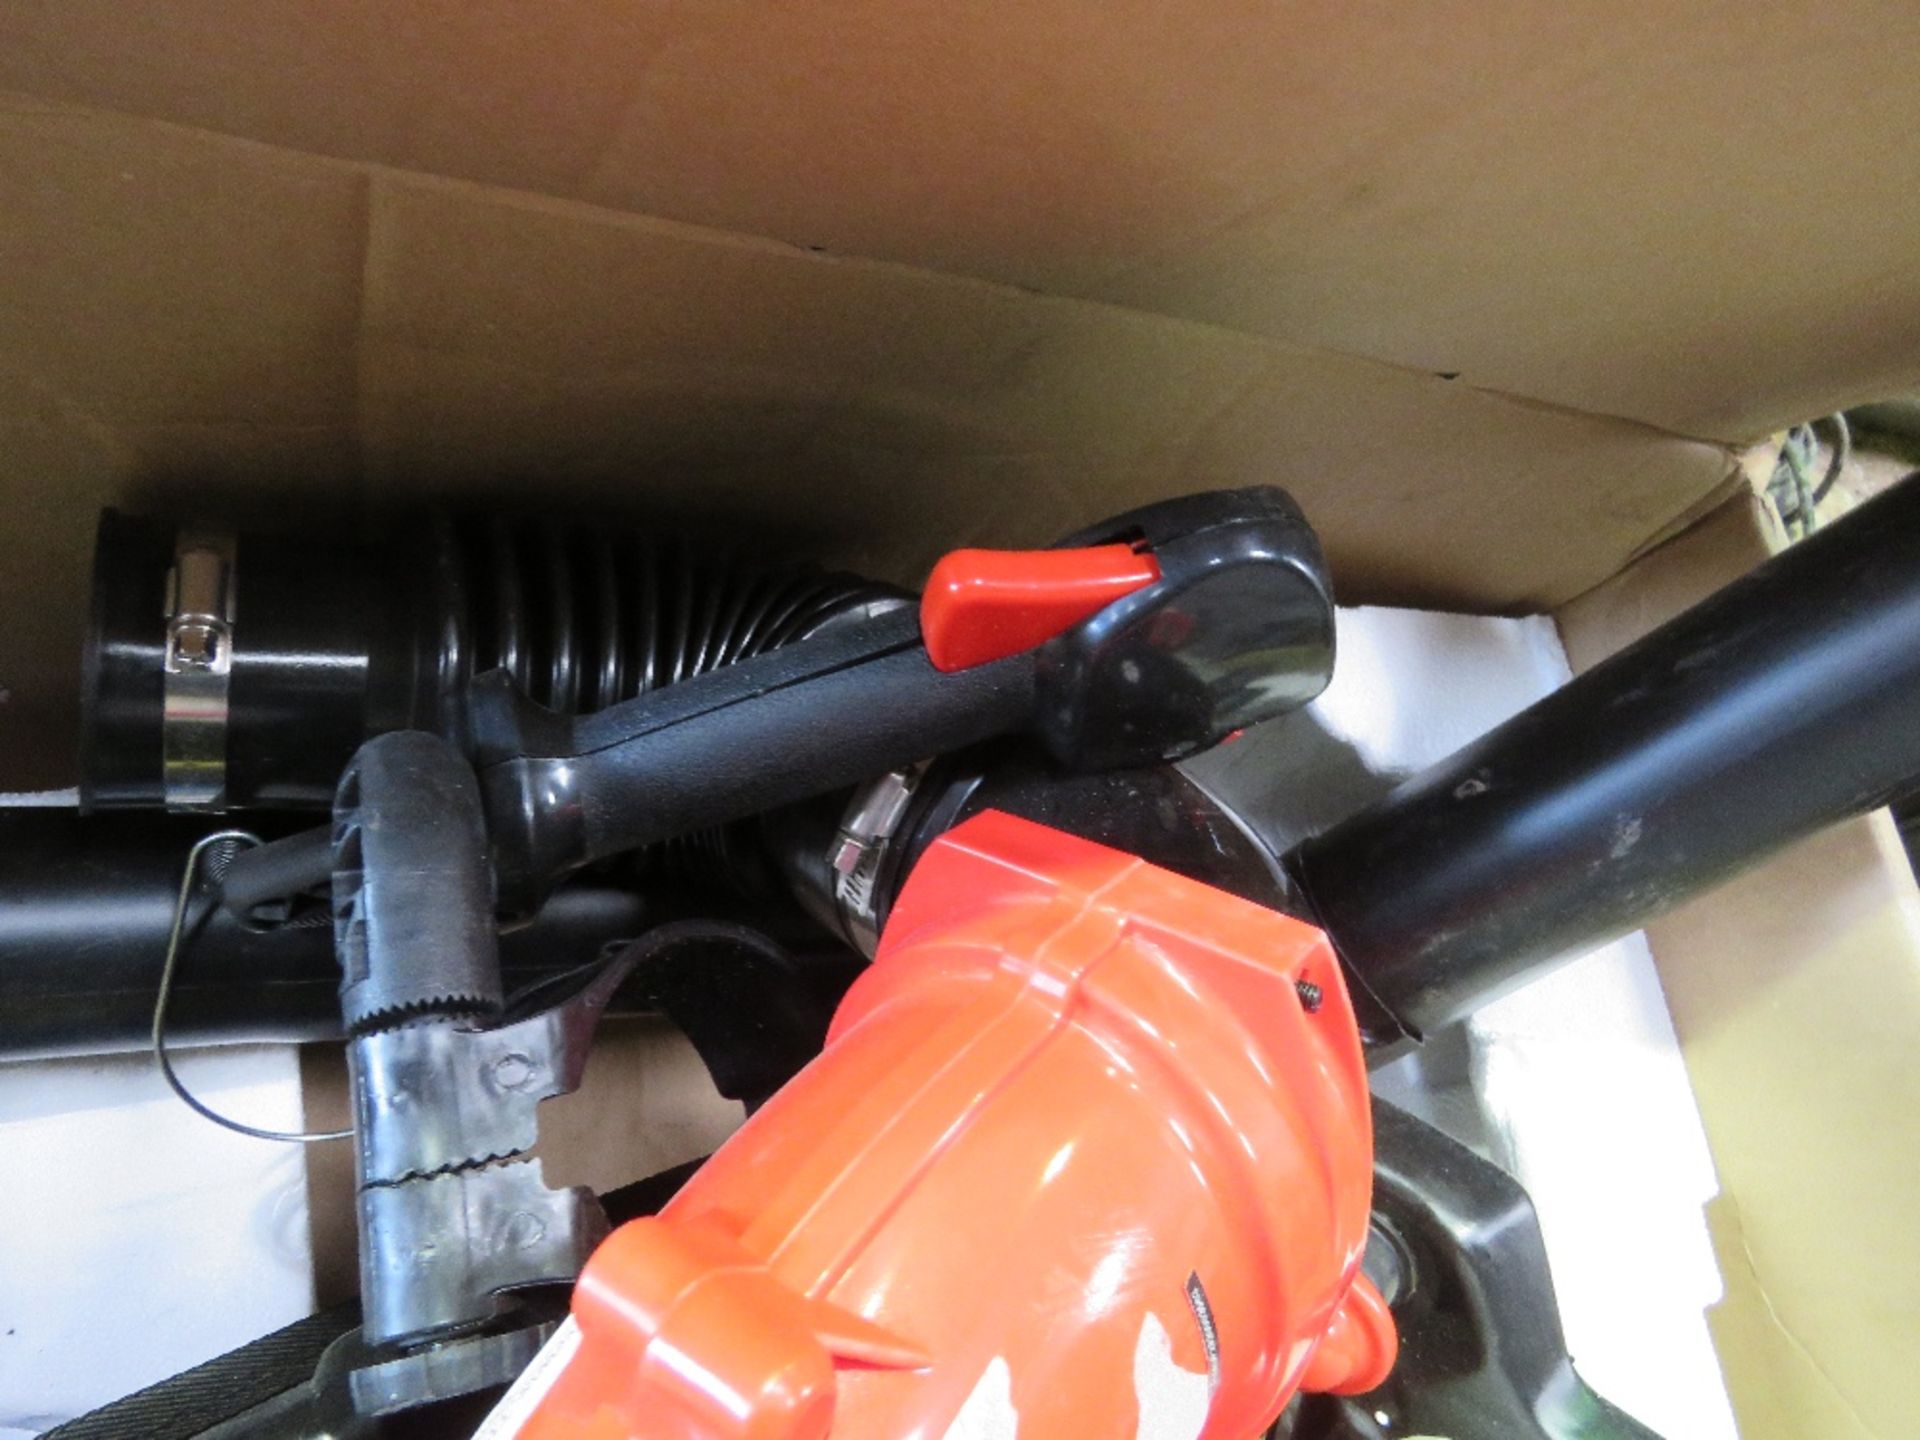 PETROL ENGINED BACKPACK BLOWER IN A BOX. - Image 4 of 7